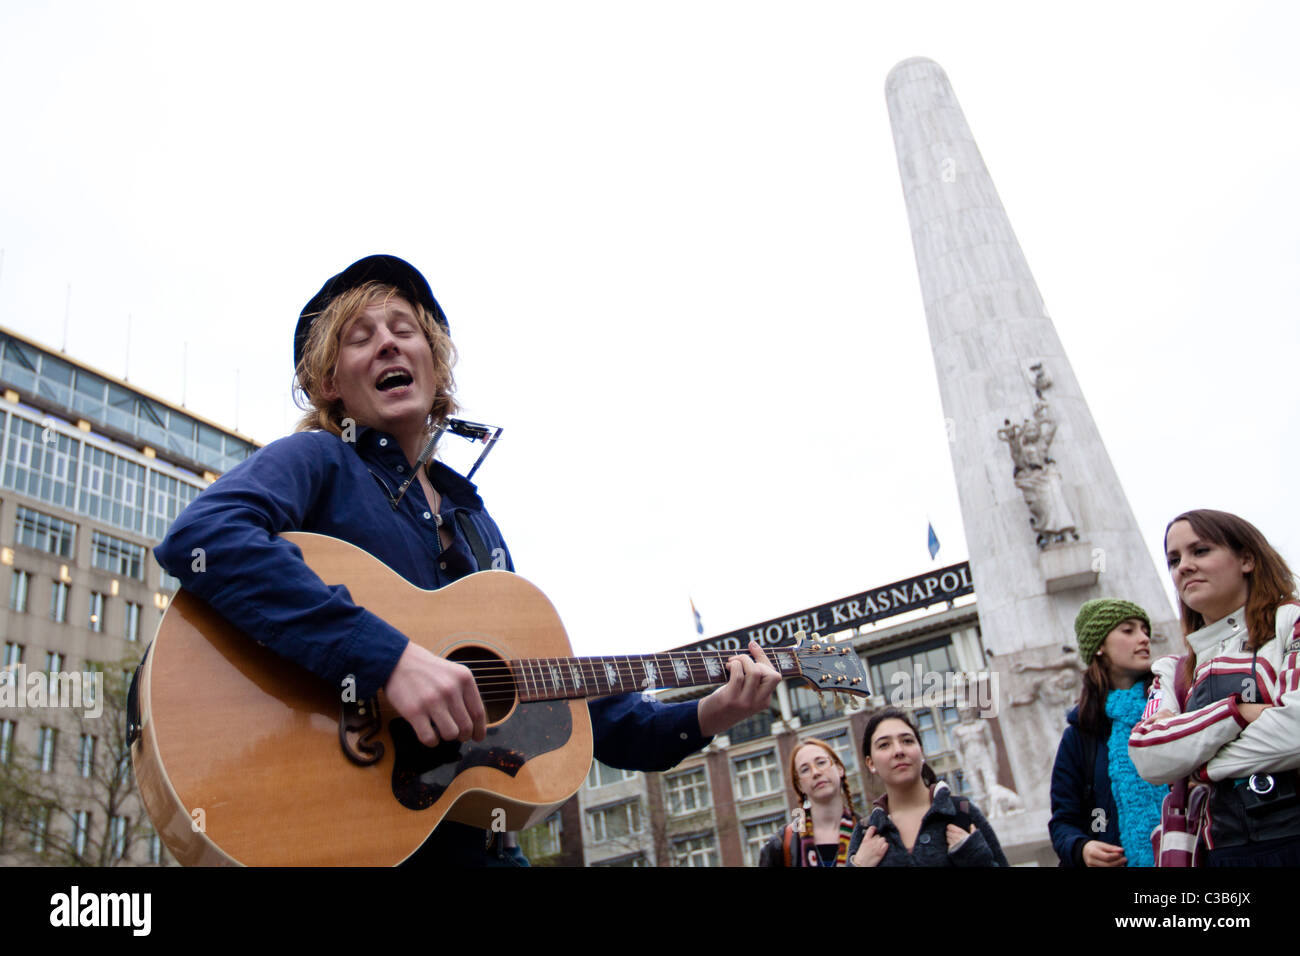 A musician entertains the crowd at Dam Square in Amsterdam Stock Photo